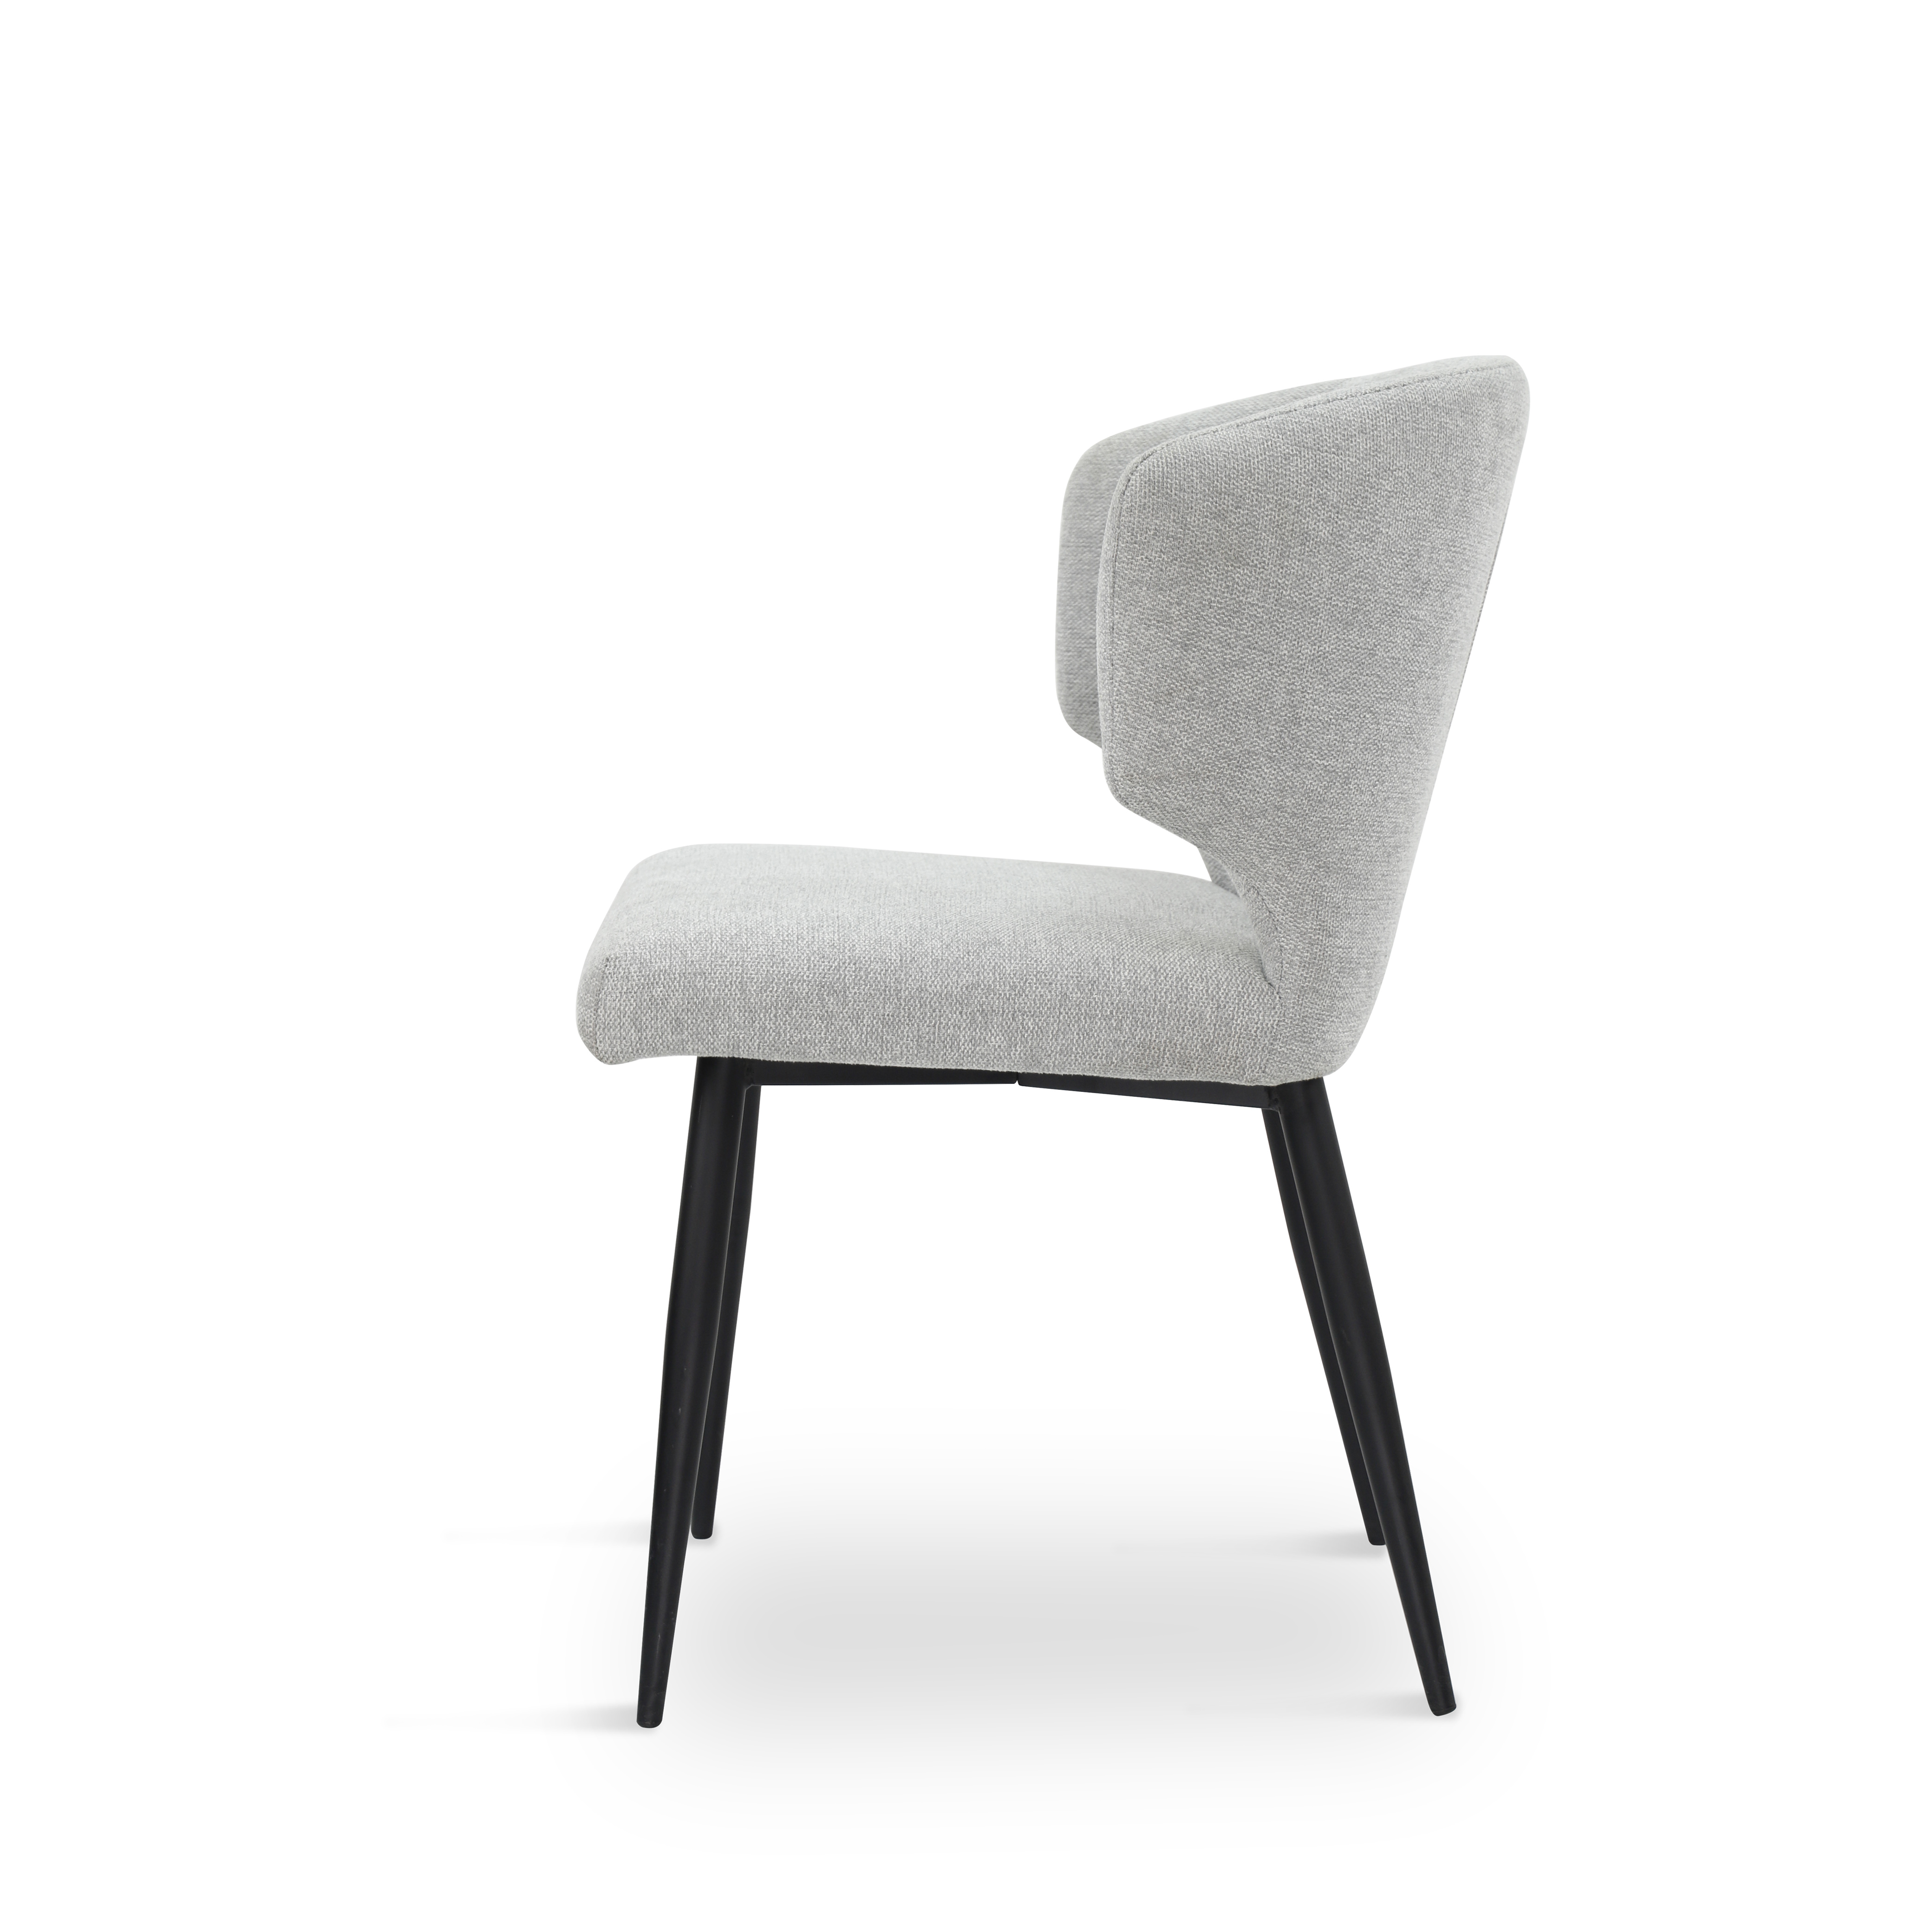 Stylish Tail Shape Linen  chair for dining or living room